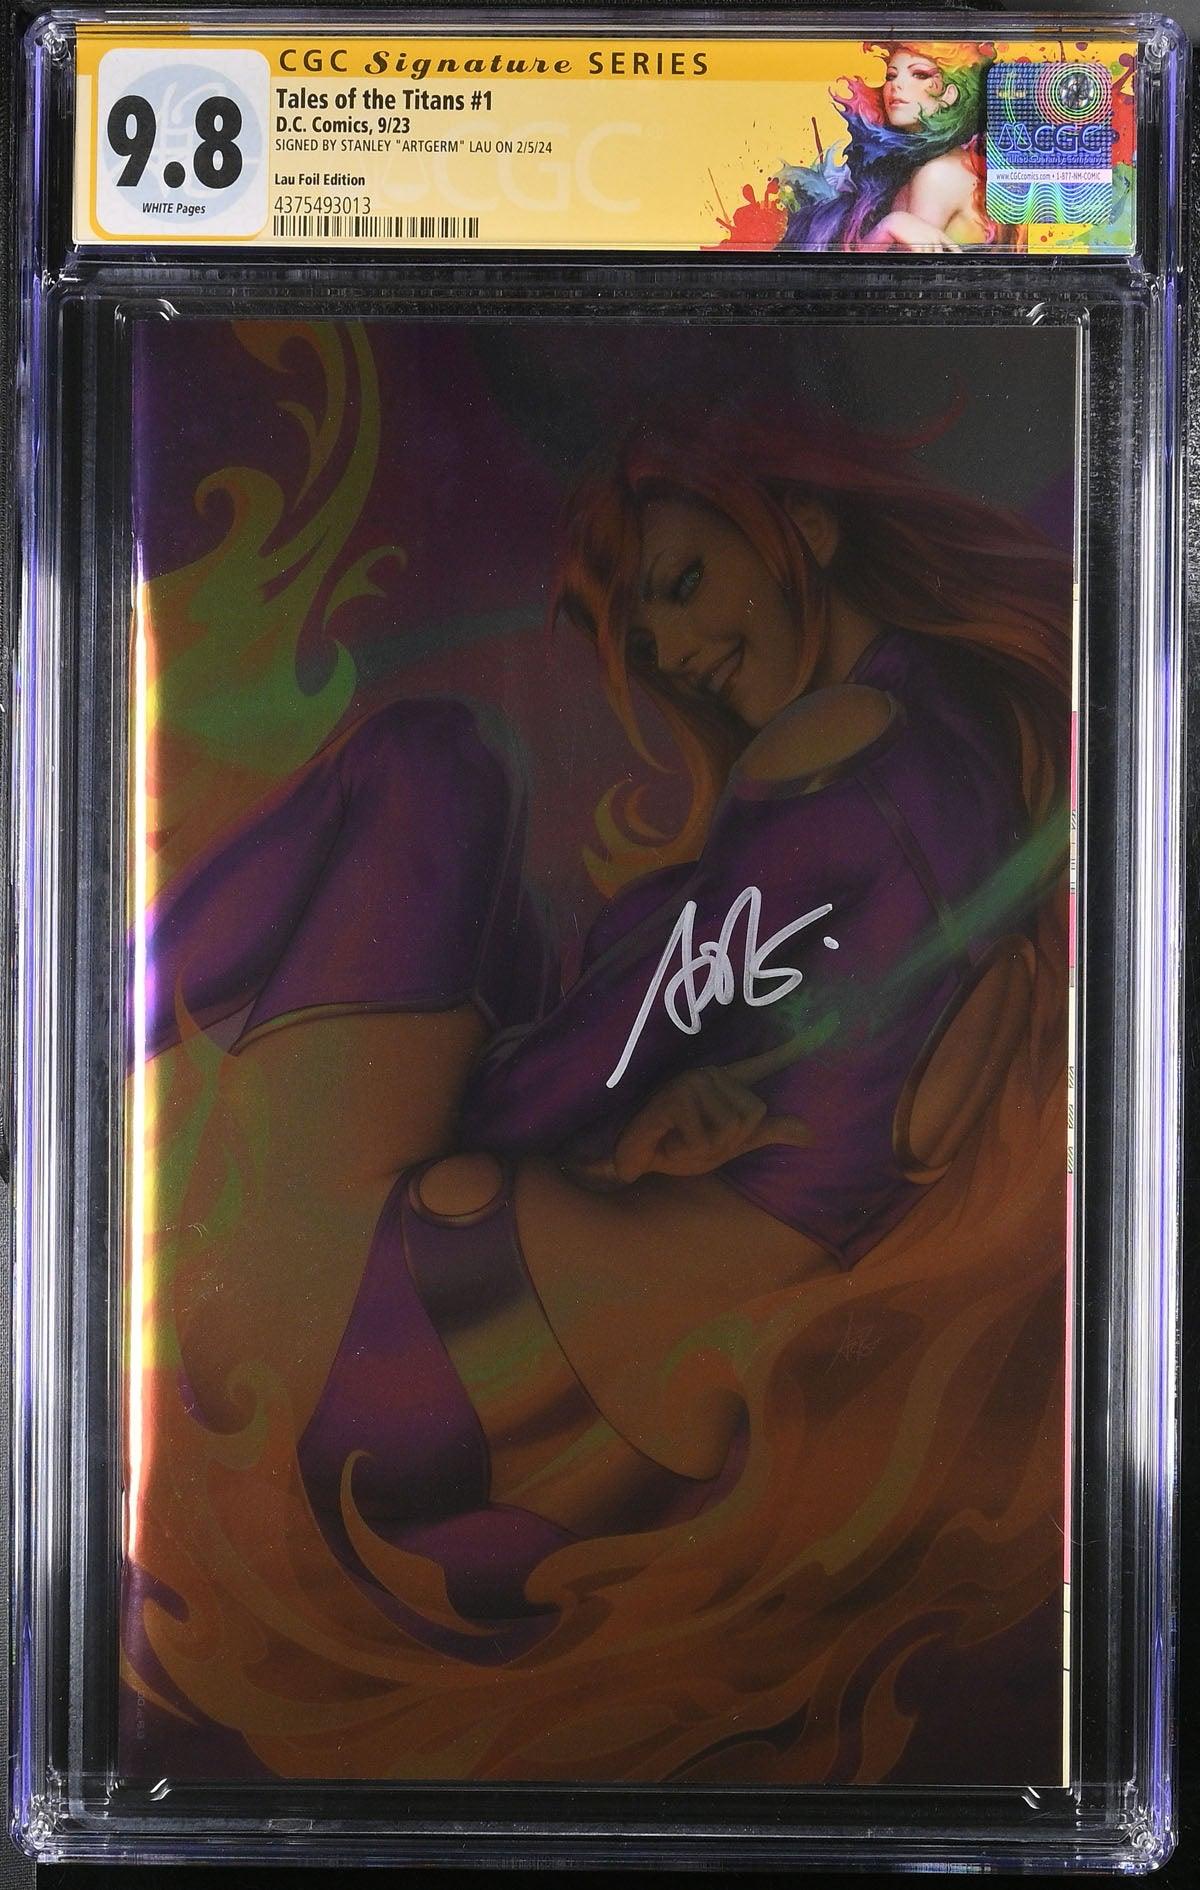 CGC TALES OF THE TITANS #1 LAU FOIL EDITION (9.8) SIGNATURE SERIES - SIGNED BY STANLEY "ARTGERM"